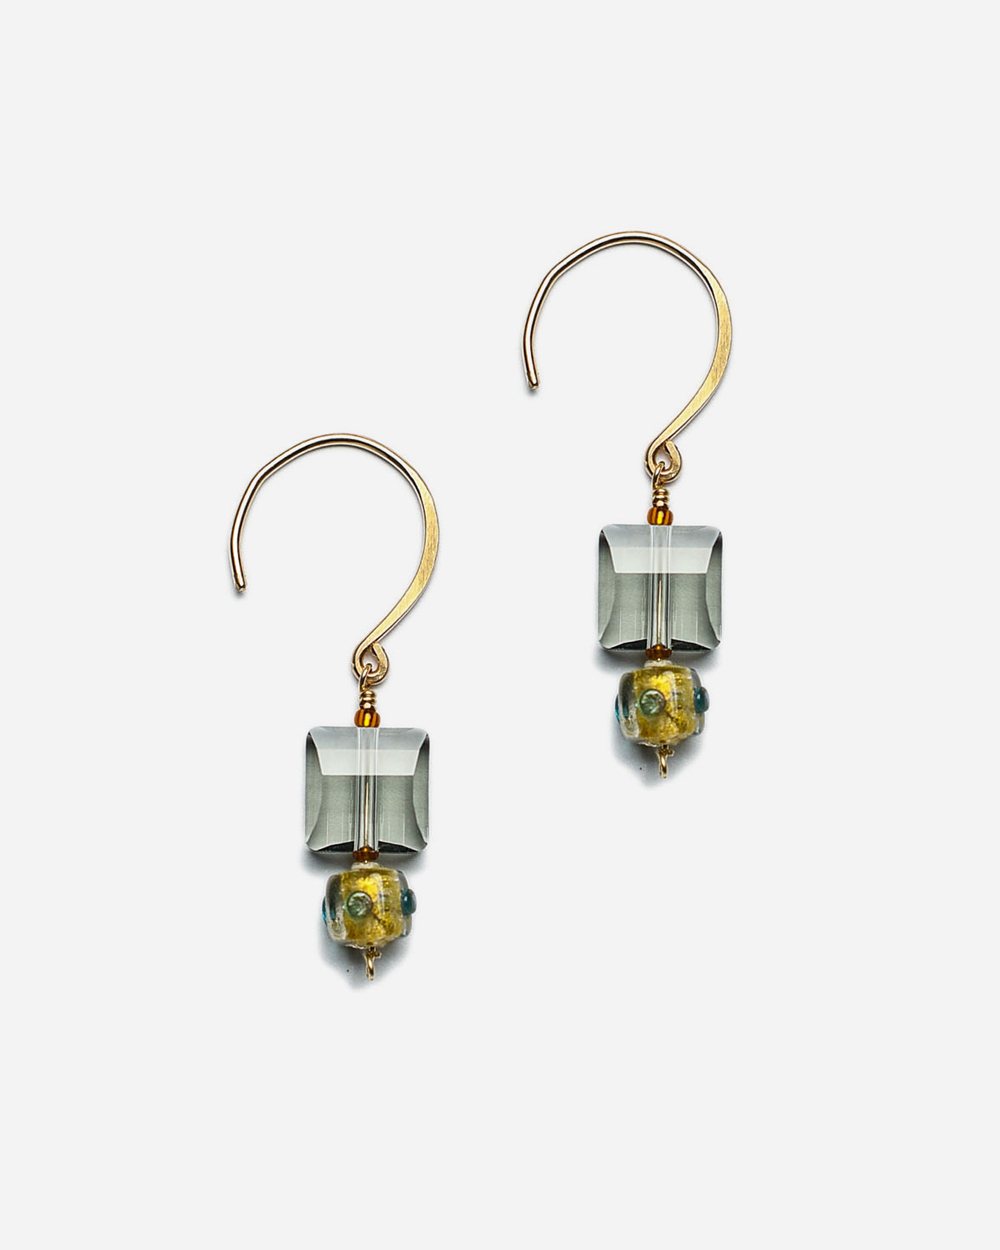 14k gold filled drop earrings with gray square crystals and handmade glass beads